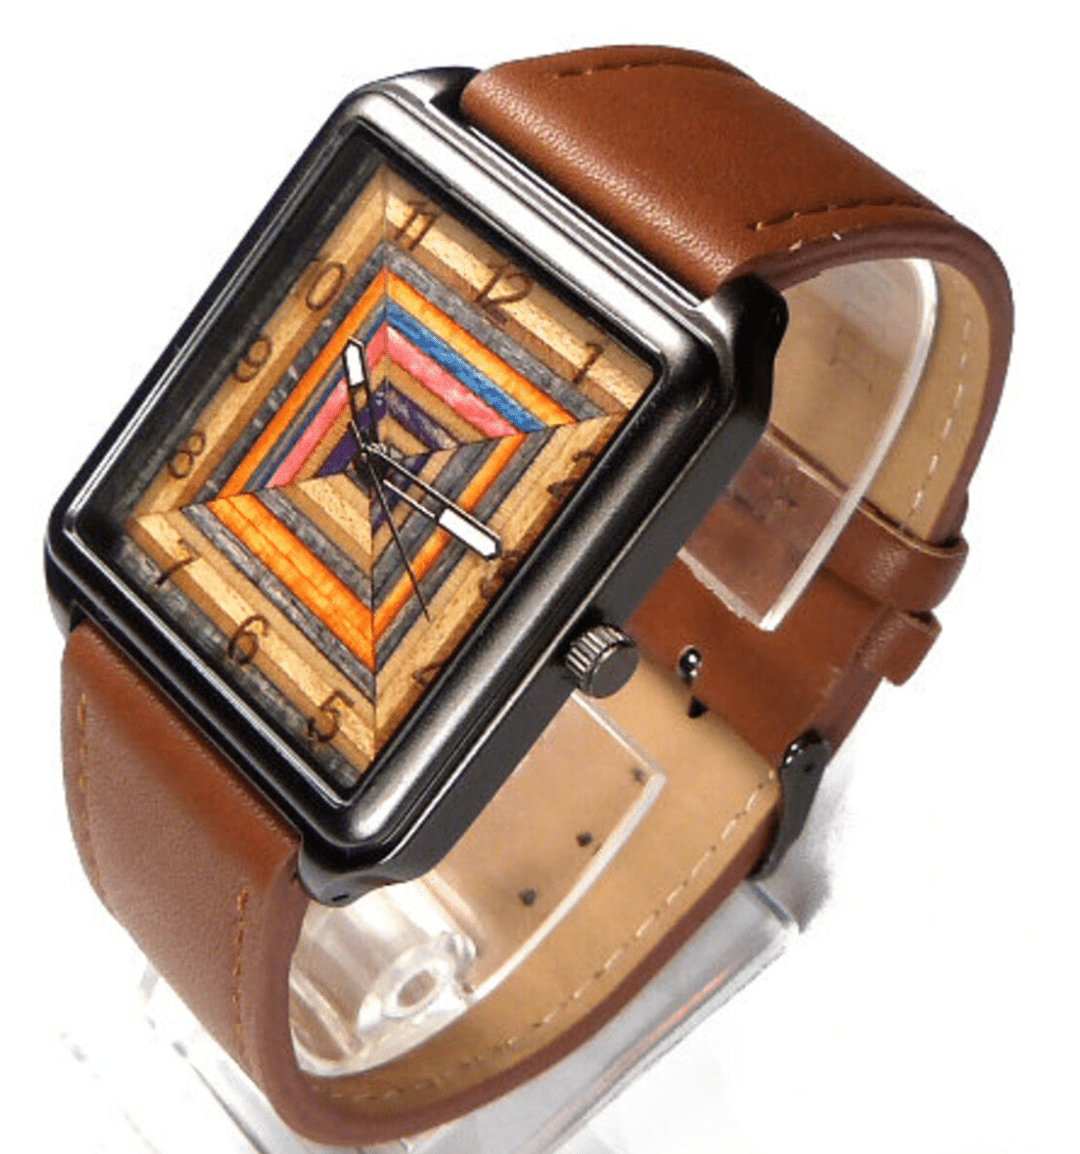 Watch with brown leather ban and a square striped watch face